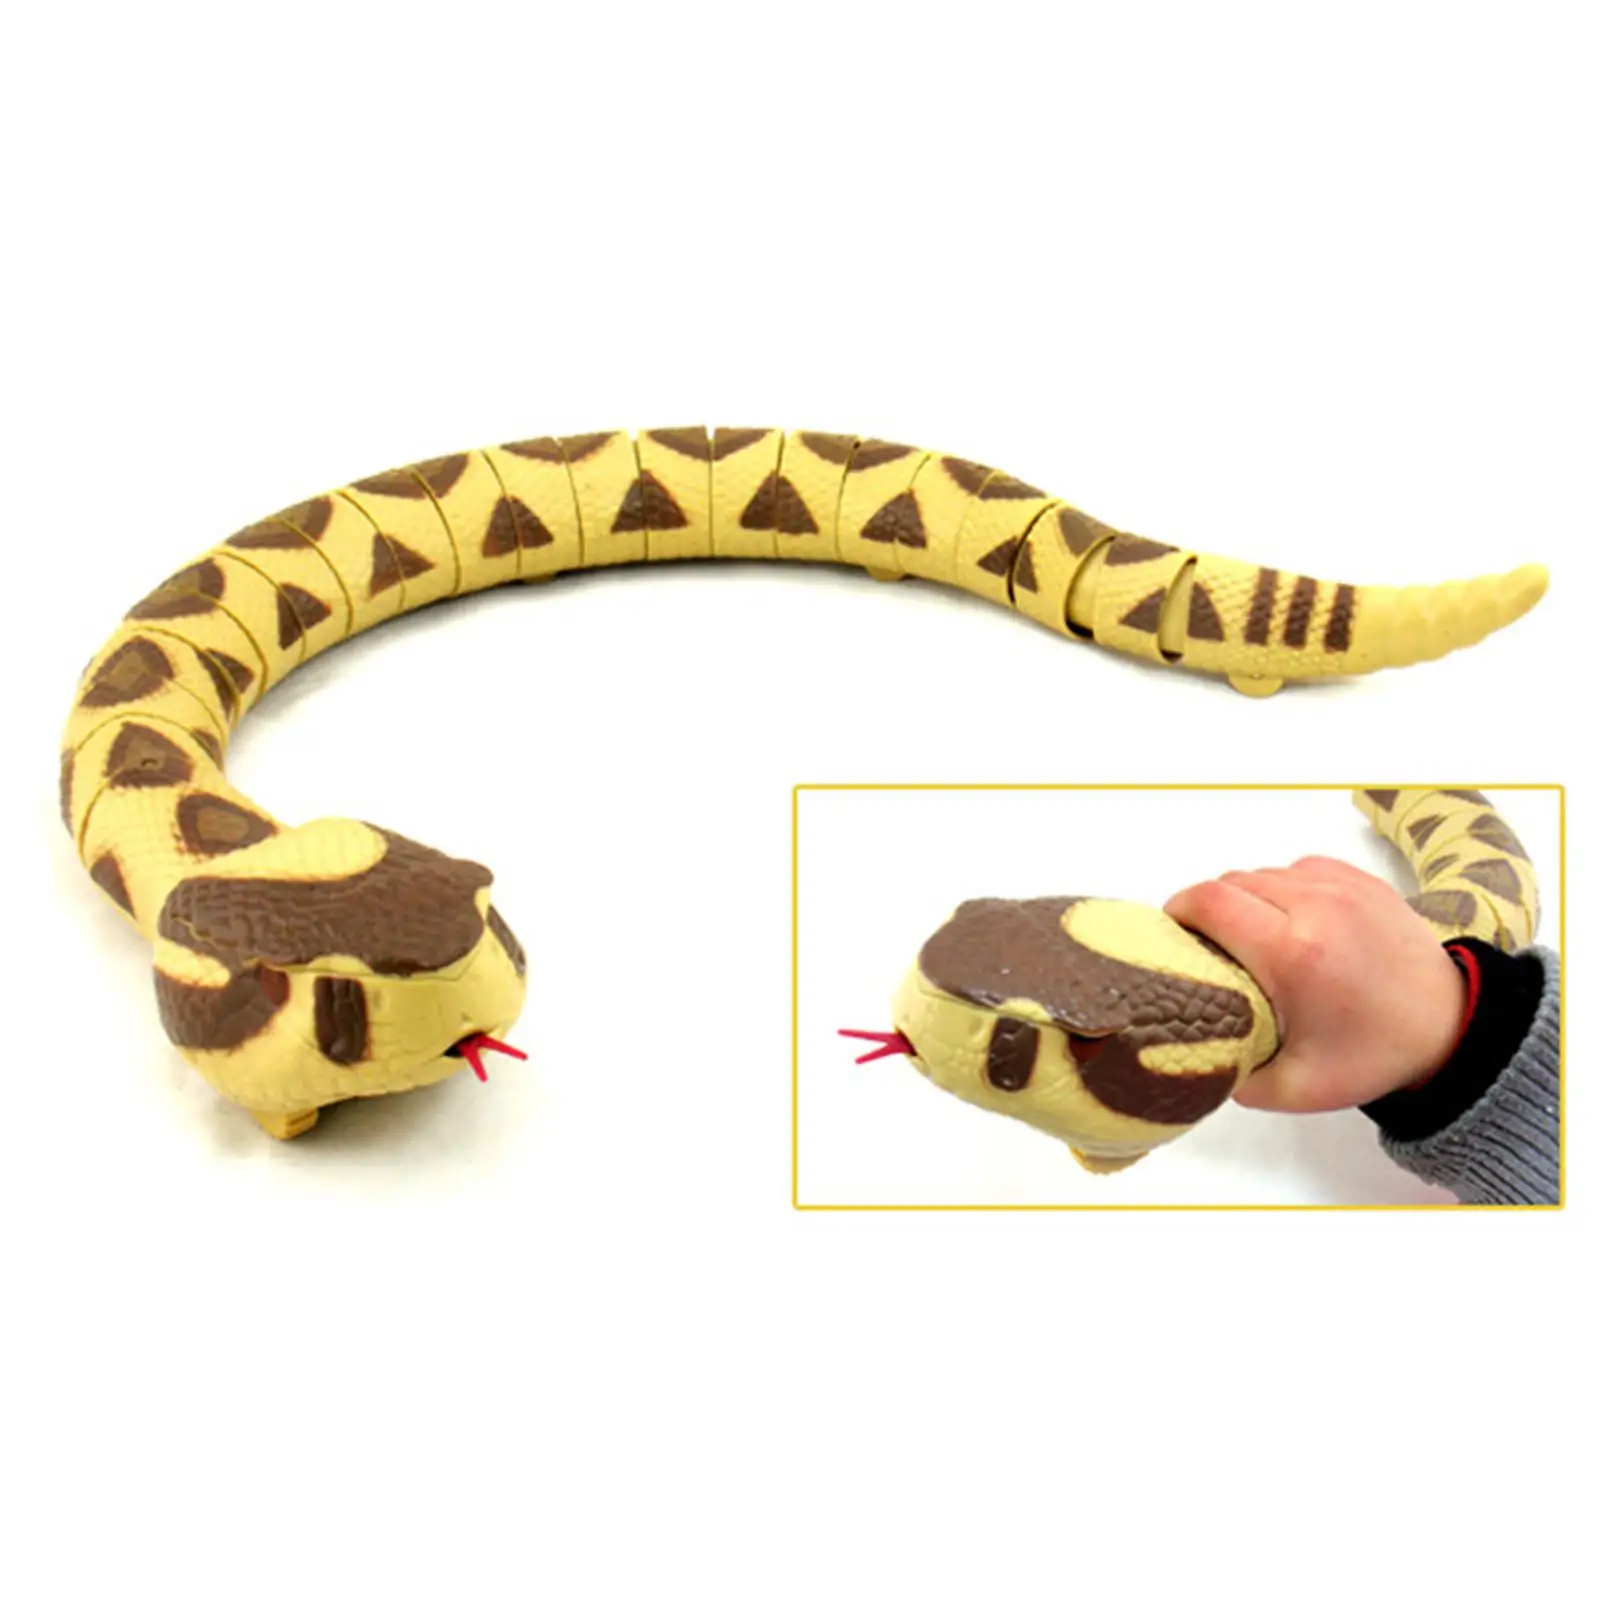 Simulation RC Snake Toys Scary Snake Toy Party Favors Artifical Snake Model for Party Favor